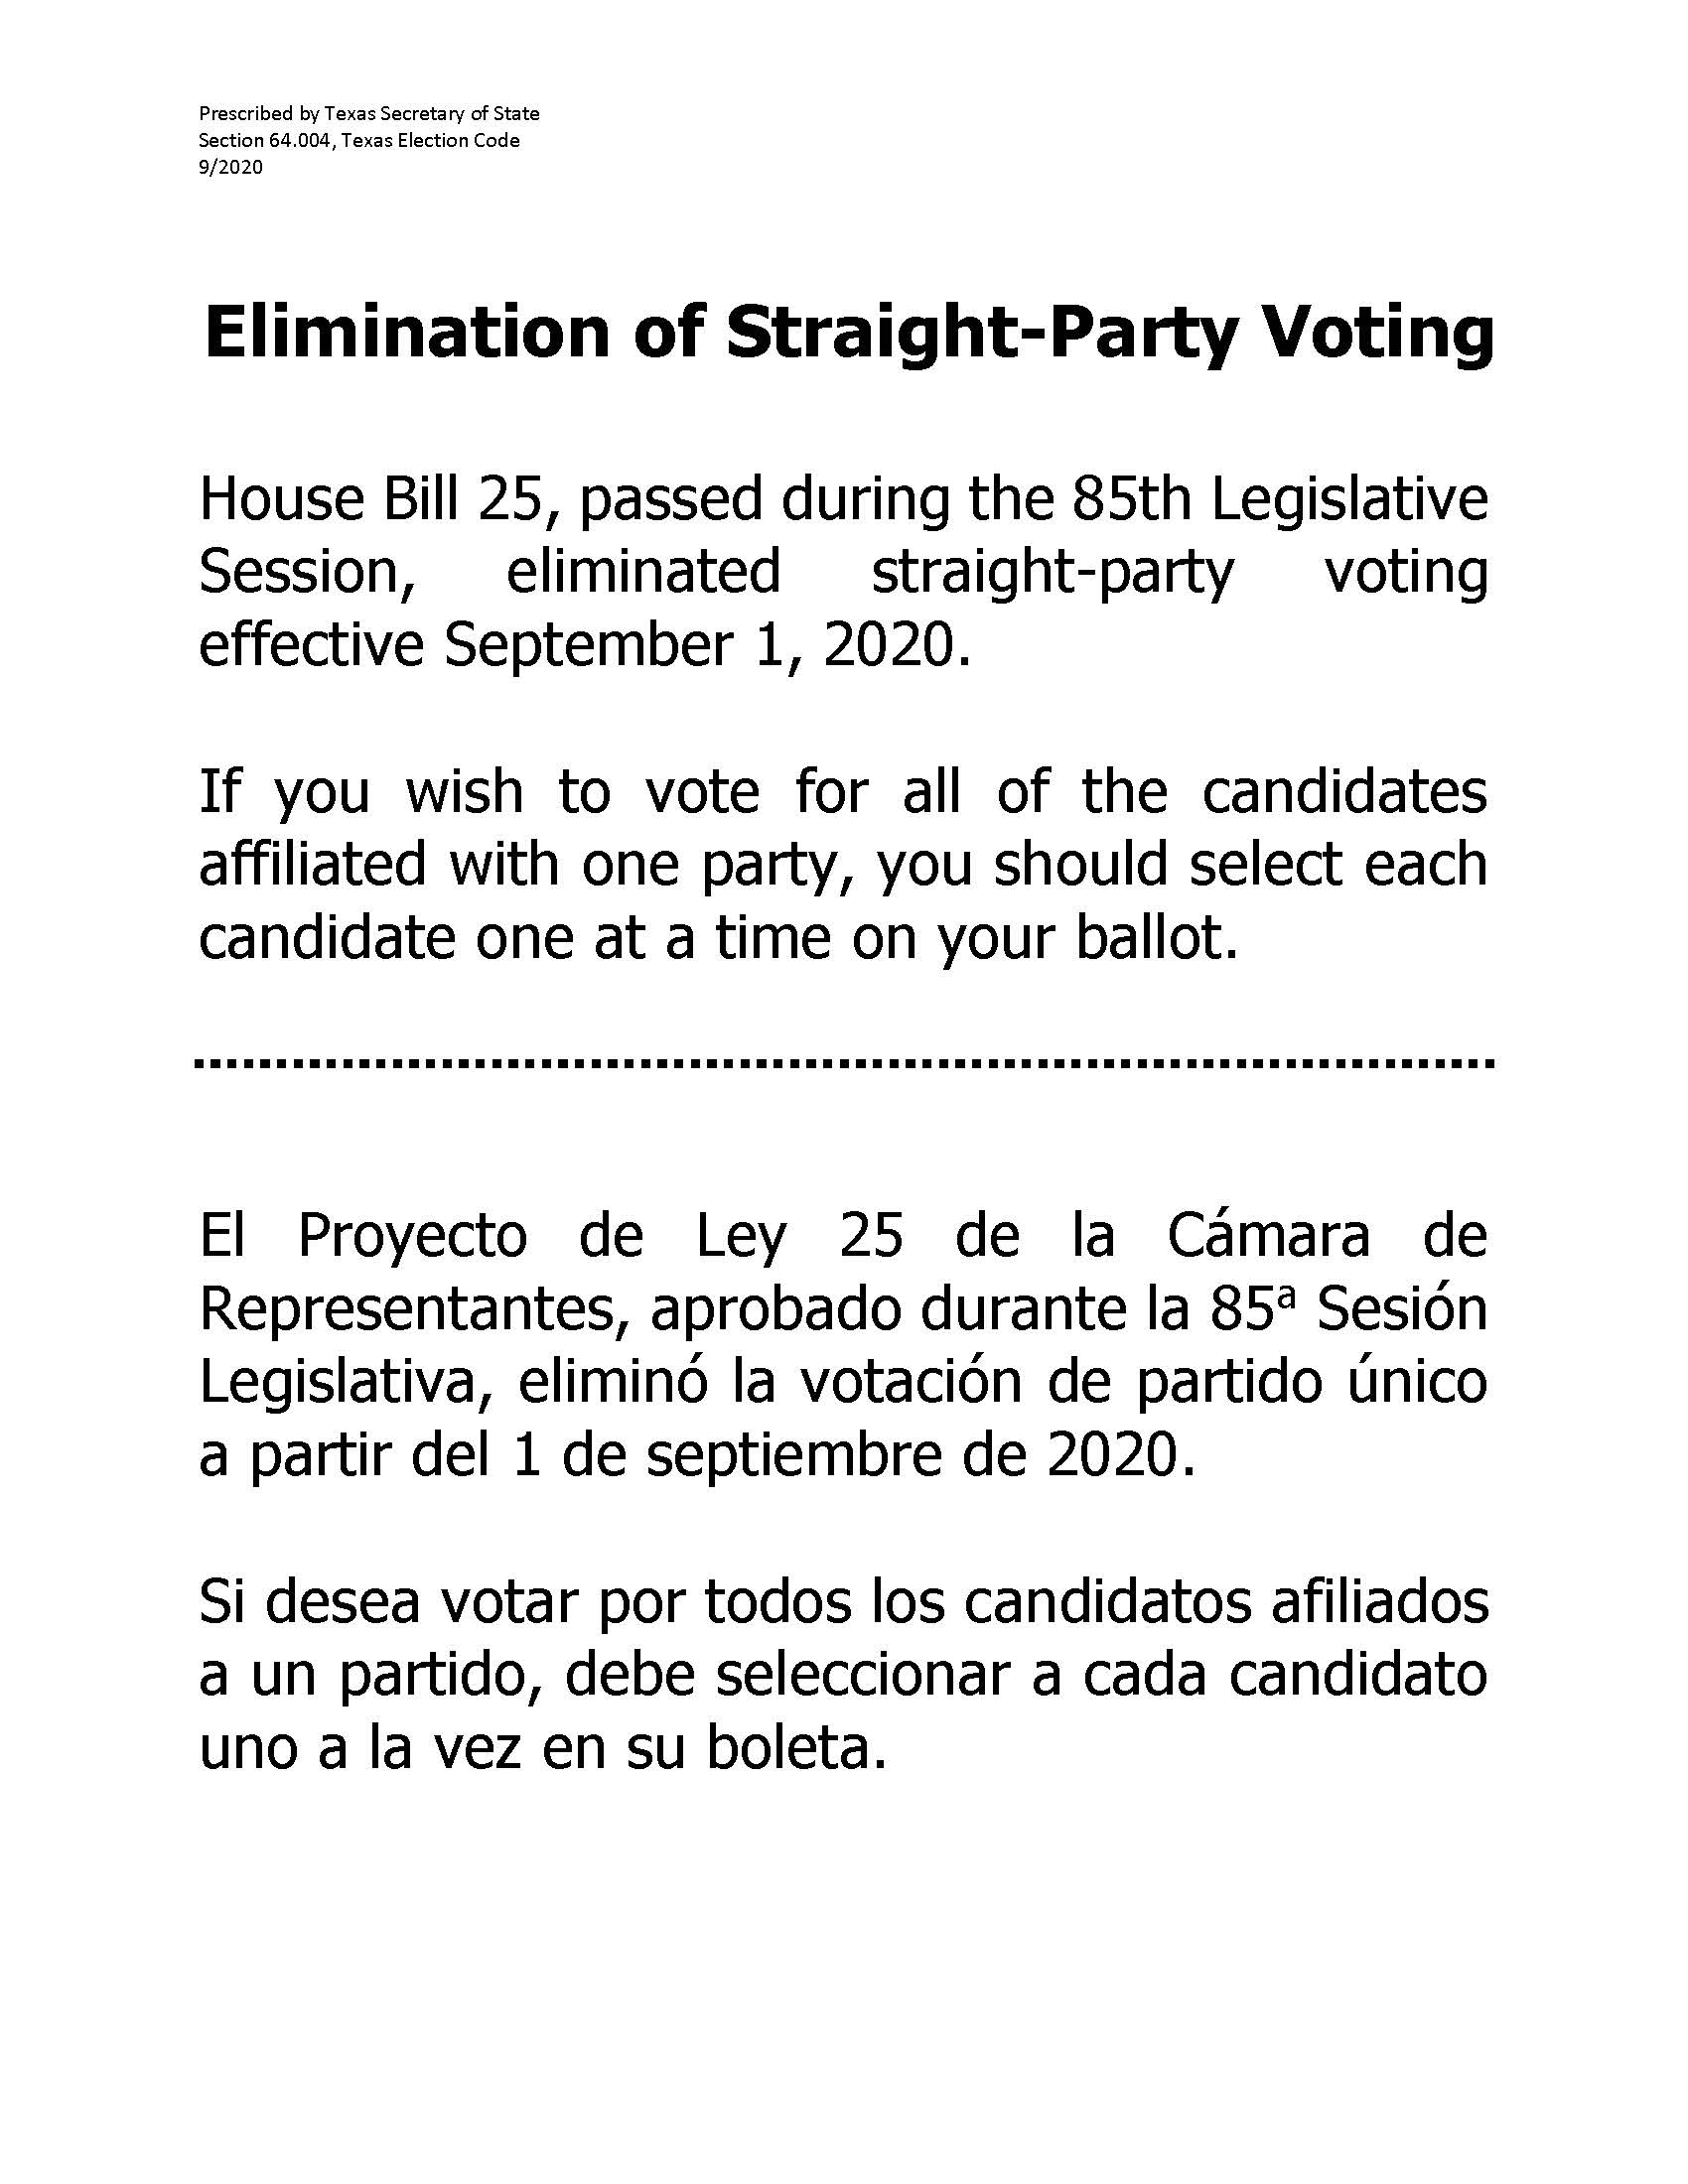 Link to PDF regarding Straight Ticket Party Elimination for the 2020 General Election